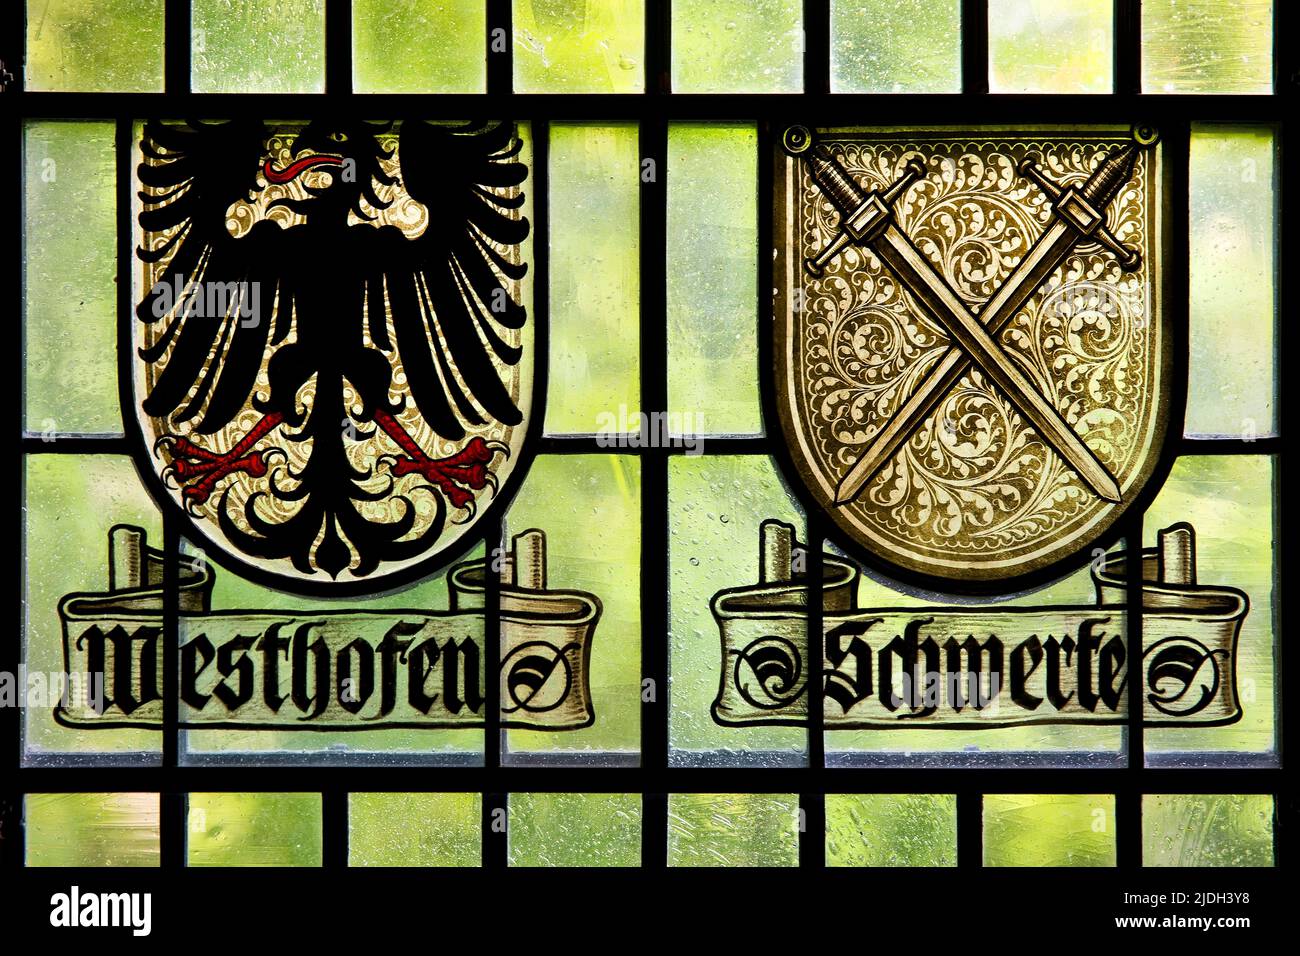 historic coat of arms glass panes of Westhofen and Schwerte, Germany, North Rhine-Westphalia Stock Photo